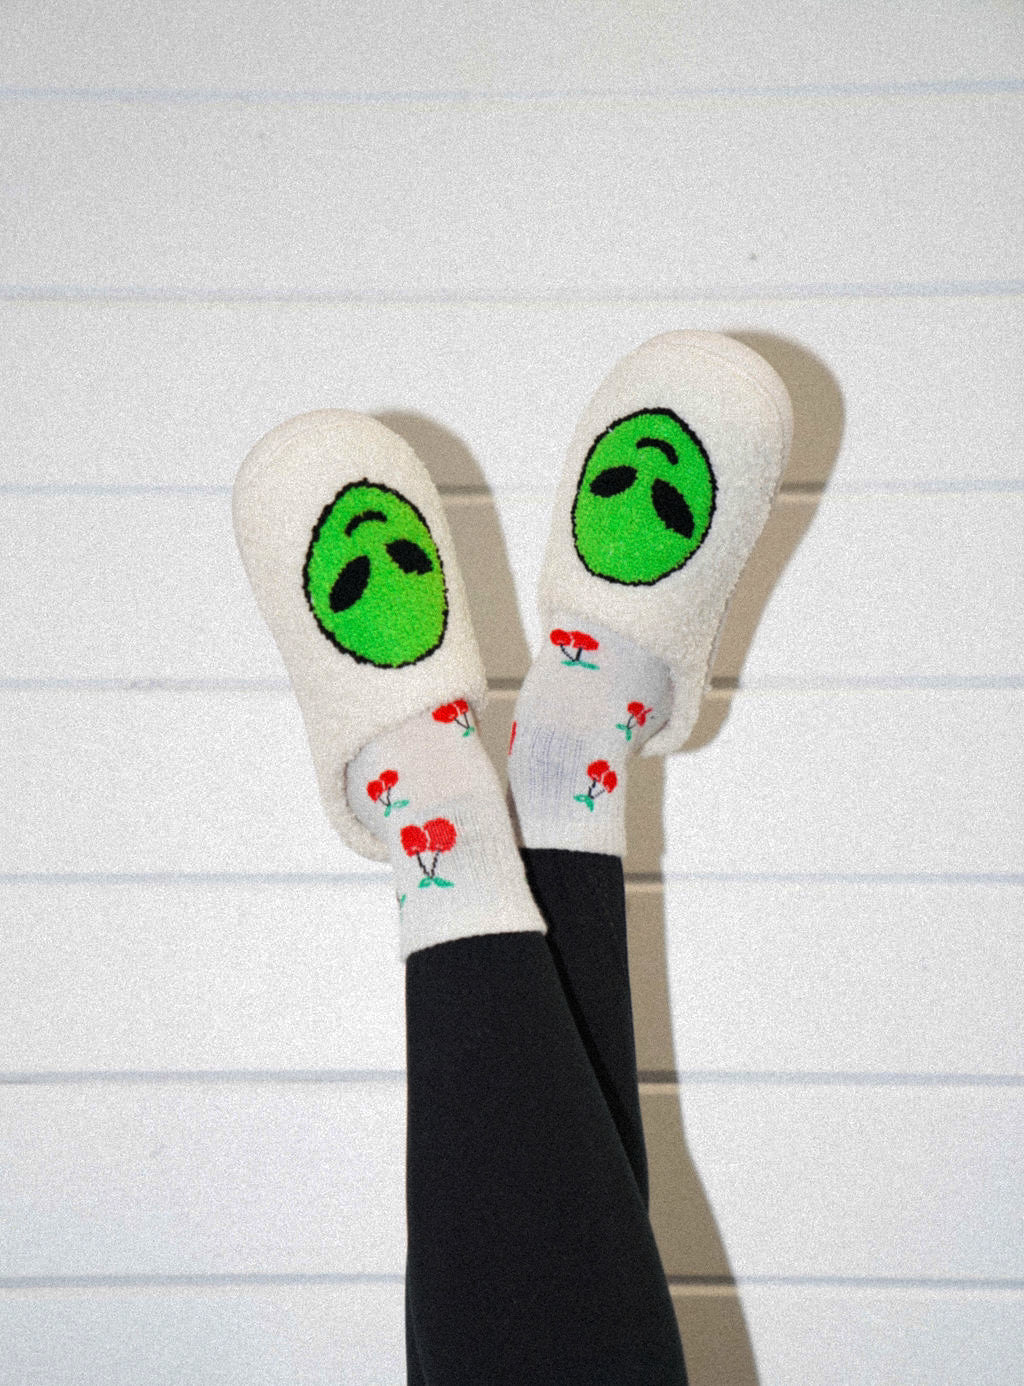 Out of This World Slippers